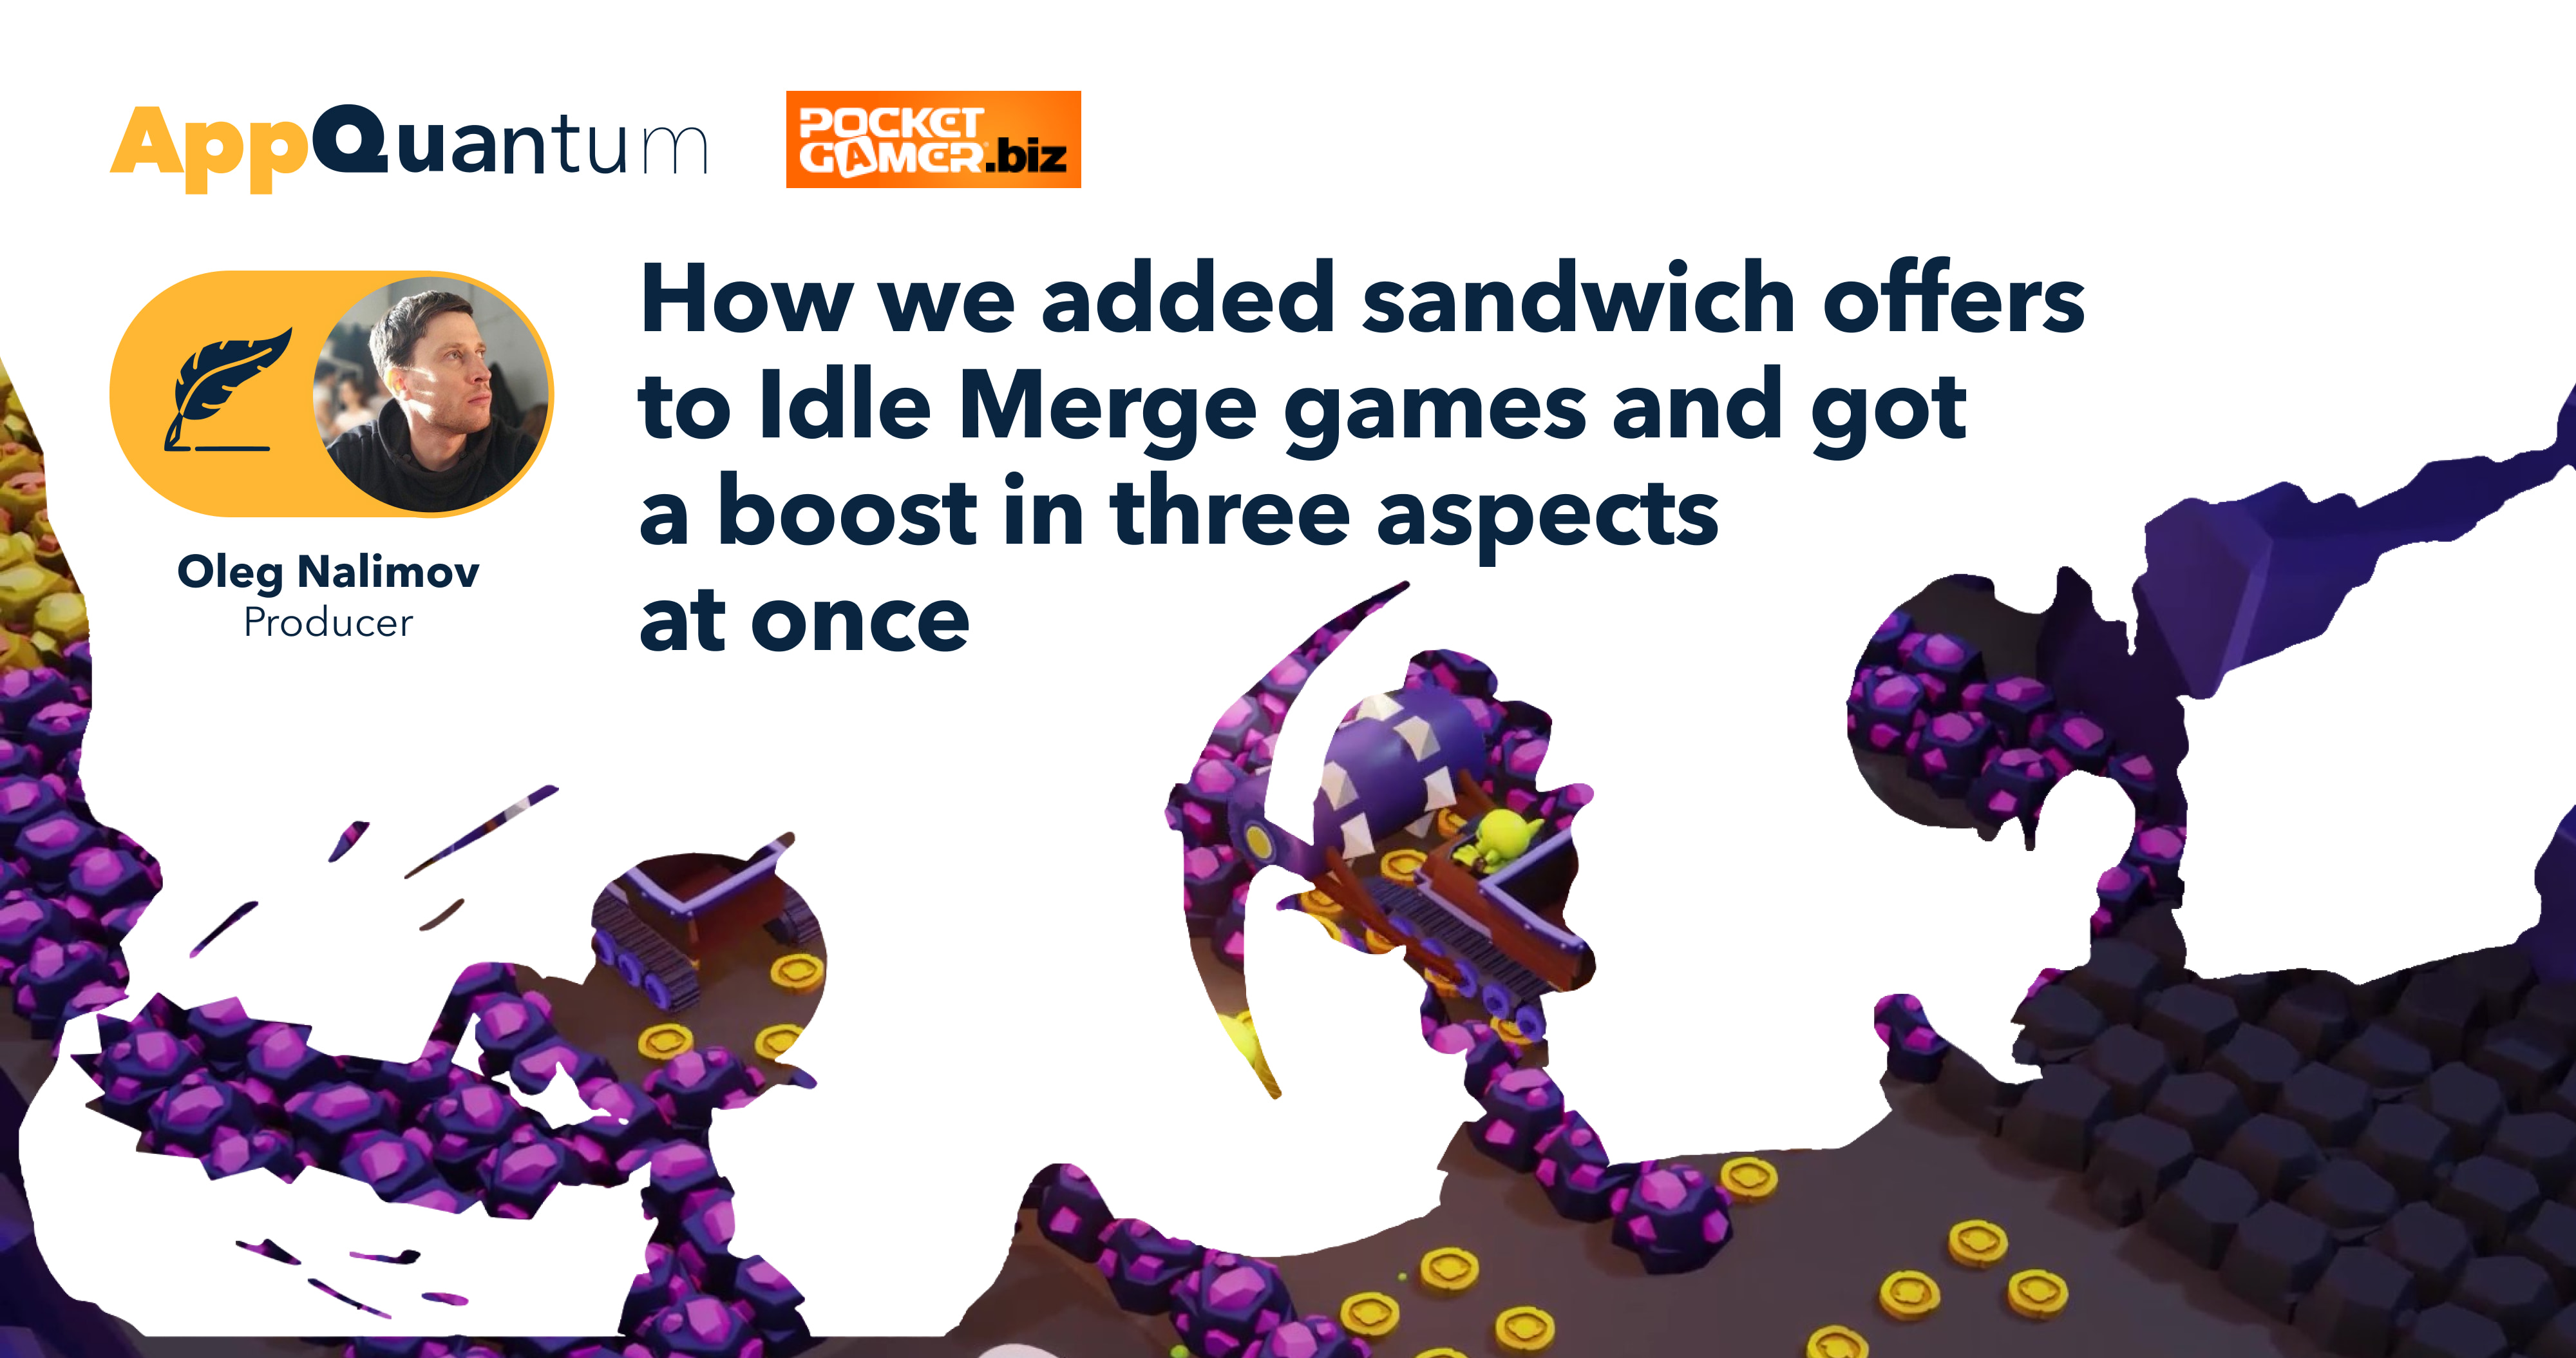 How We Added Sandwich Offers to Idle Merge Games and Got a Boost in Three Aspects at Once